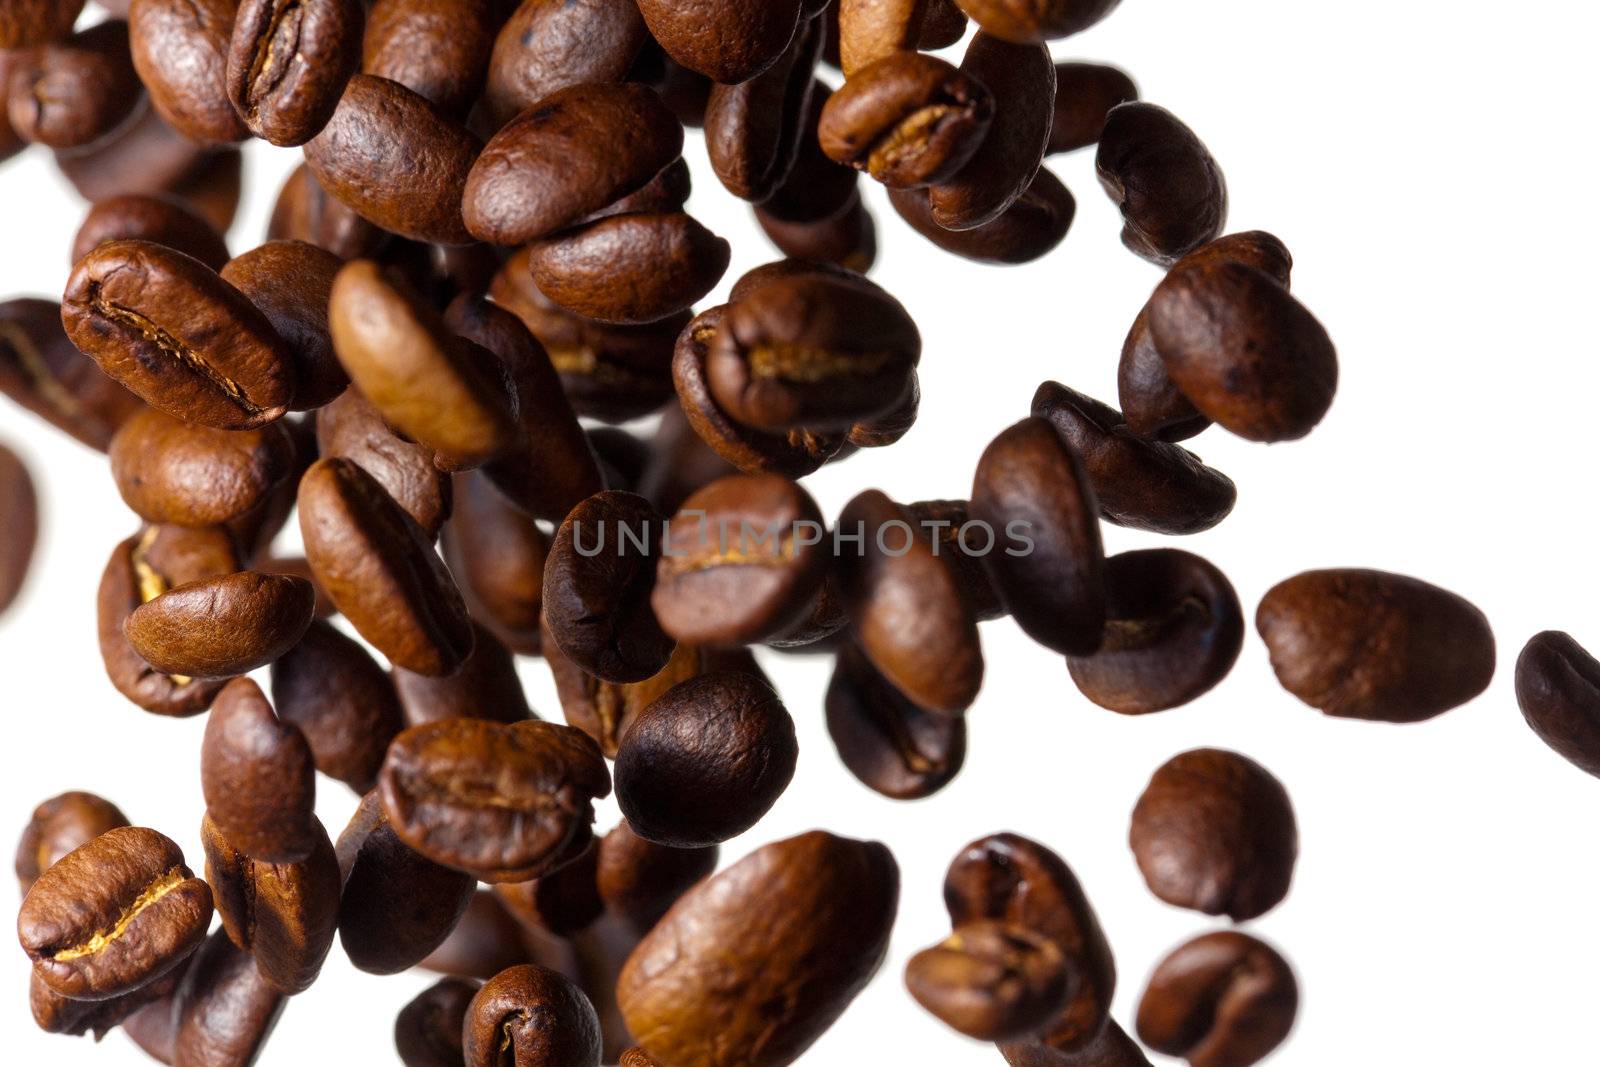 Falling grain roasted coffee on the side of a white background, photographed with a shallow depth of field